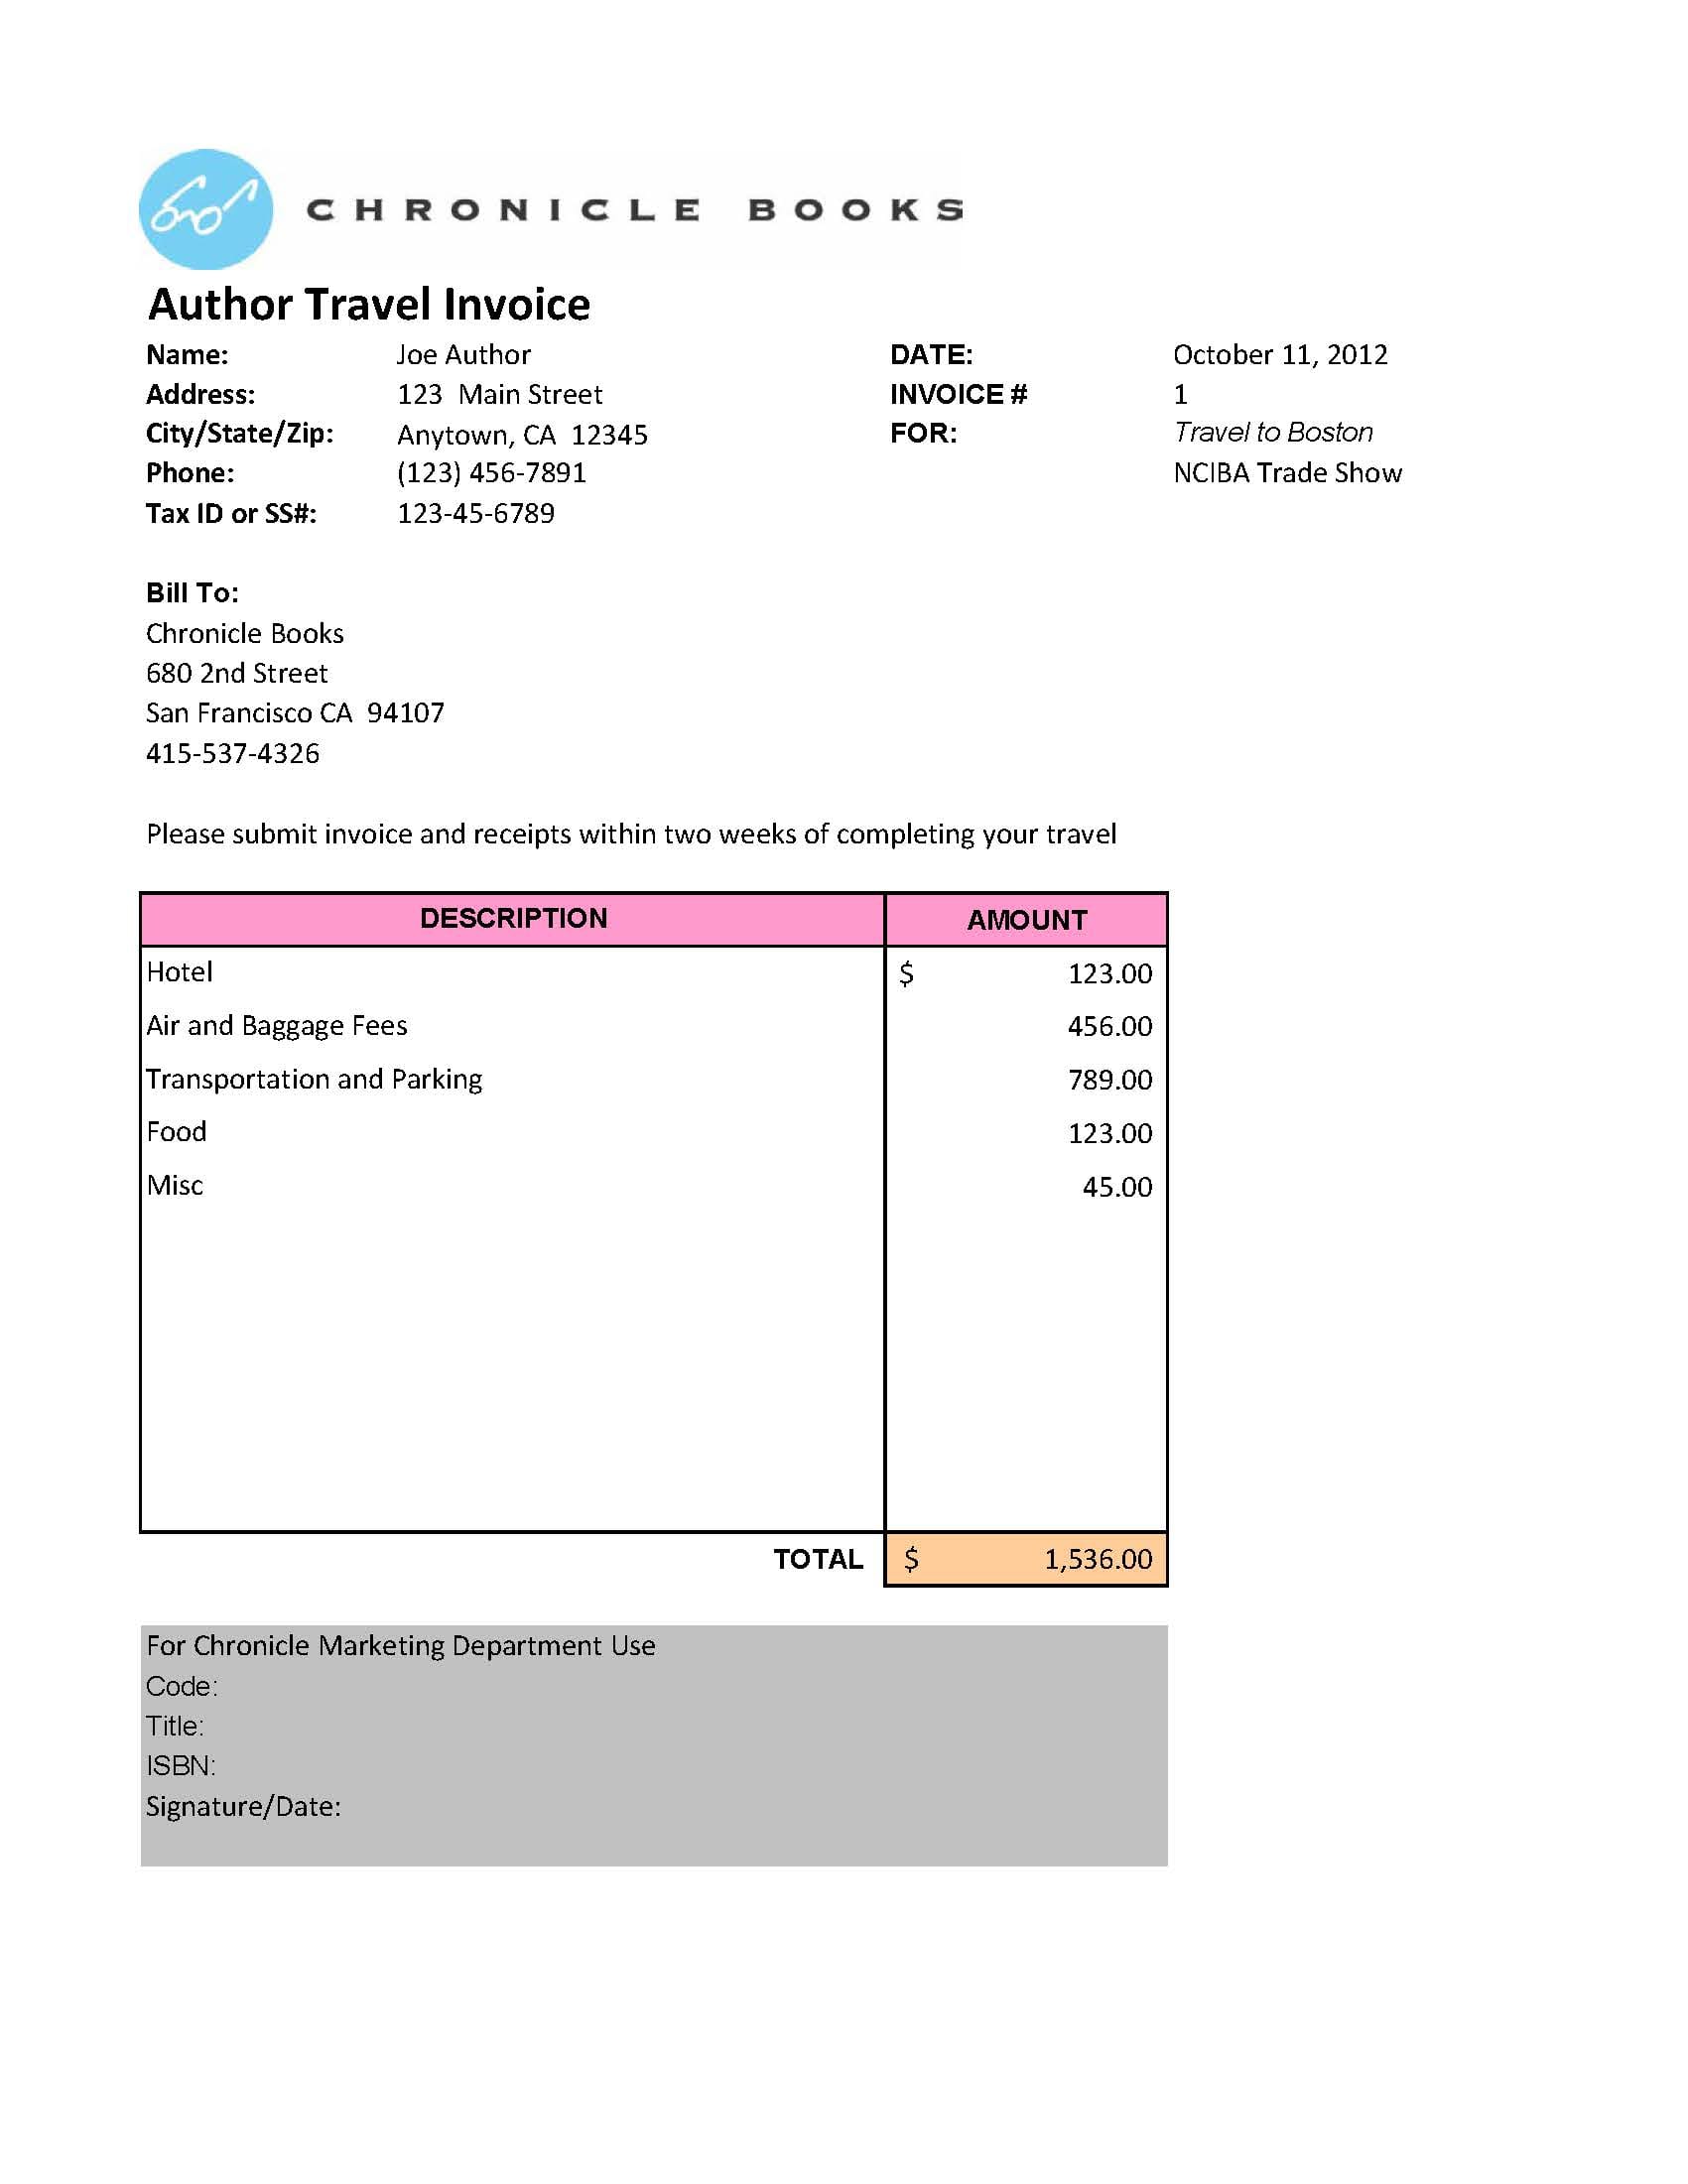 Art Commission Invoice Template